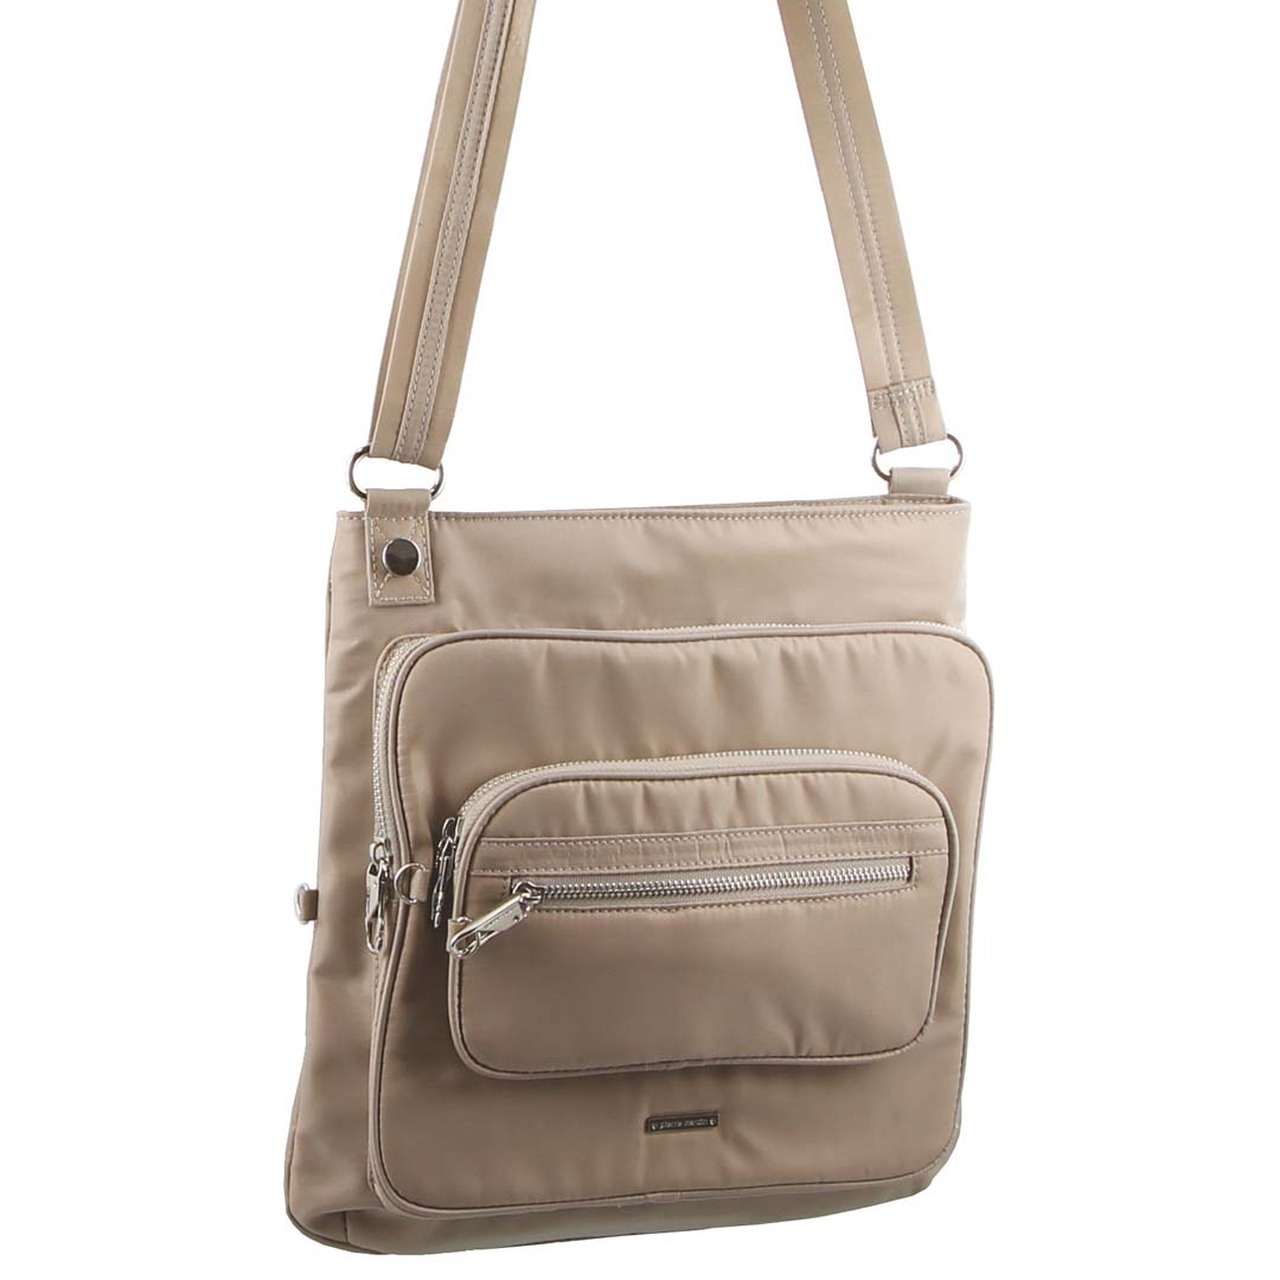 Pierre Cardin Anti-Theft Cross Body Bag Taupe - Online | KG Electronic